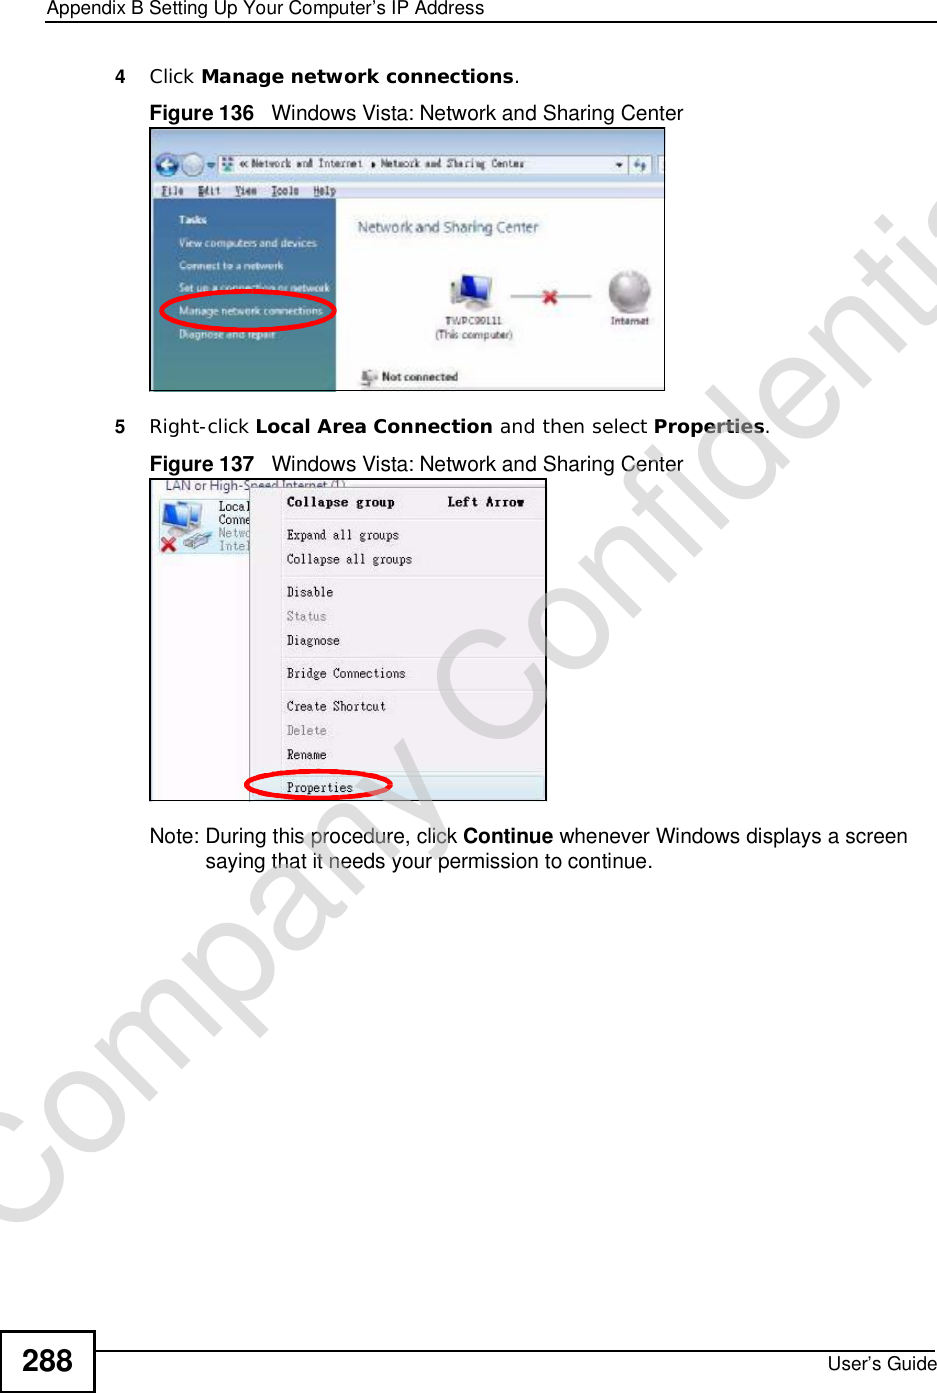 Appendix BSetting Up Your Computer’s IP AddressUser’s Guide2884Click Manage network connections.Figure 136   Windows Vista: Network and Sharing Center5Right-click Local Area Connection and then select Properties.Figure 137   Windows Vista: Network and Sharing CenterNote: During this procedure, click Continue whenever Windows displays a screen saying that it needs your permission to continue.Company Confidential